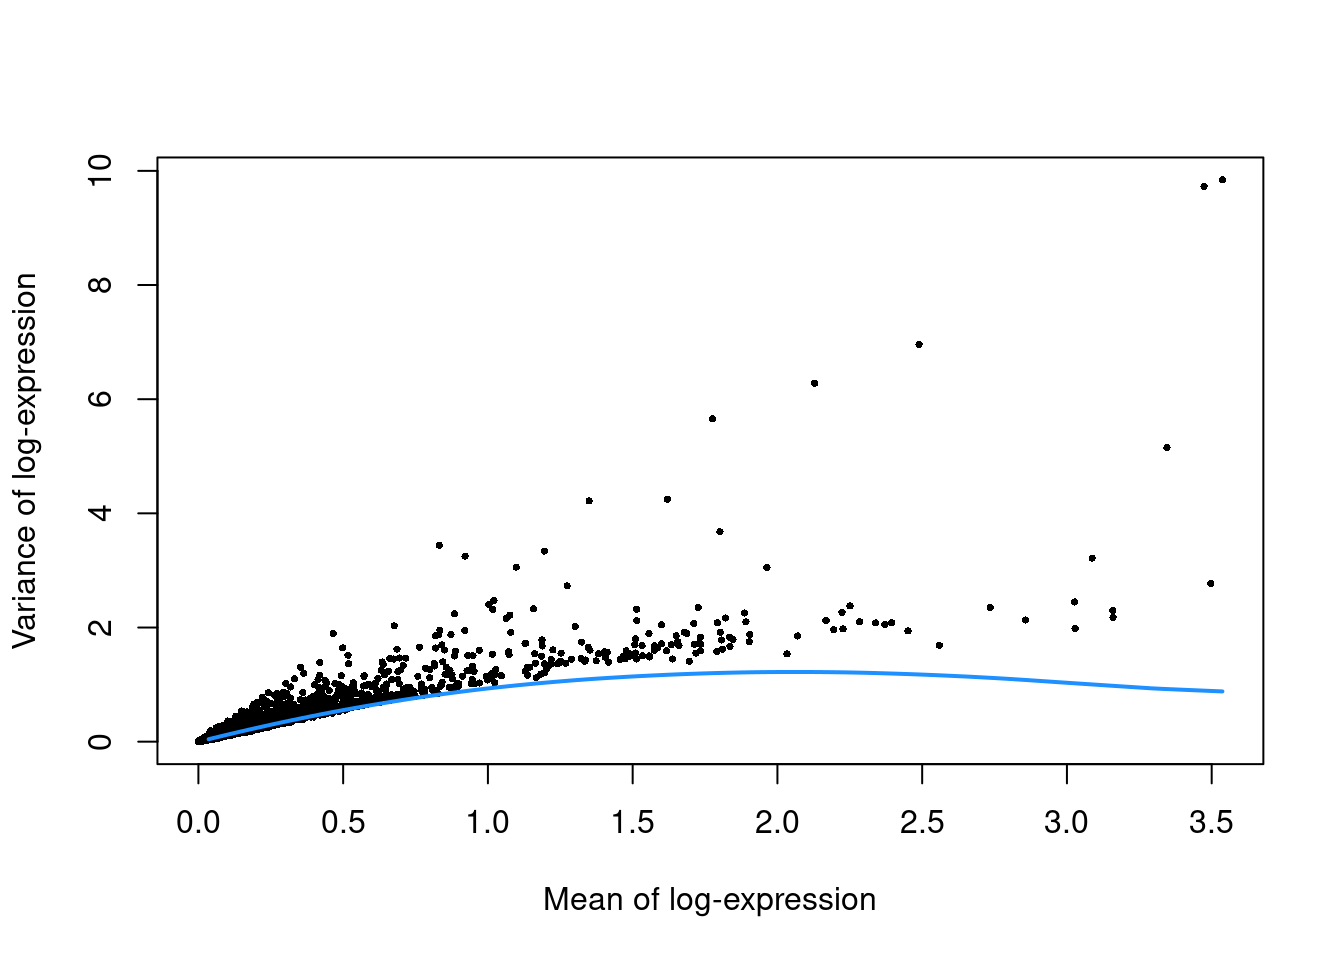 Per-gene variance as a function of the mean for the log-expression values in the Grun HSC dataset. Each point represents a gene (black) with the mean-variance trend (blue) fitted to the simulated Poisson-distributed noise.